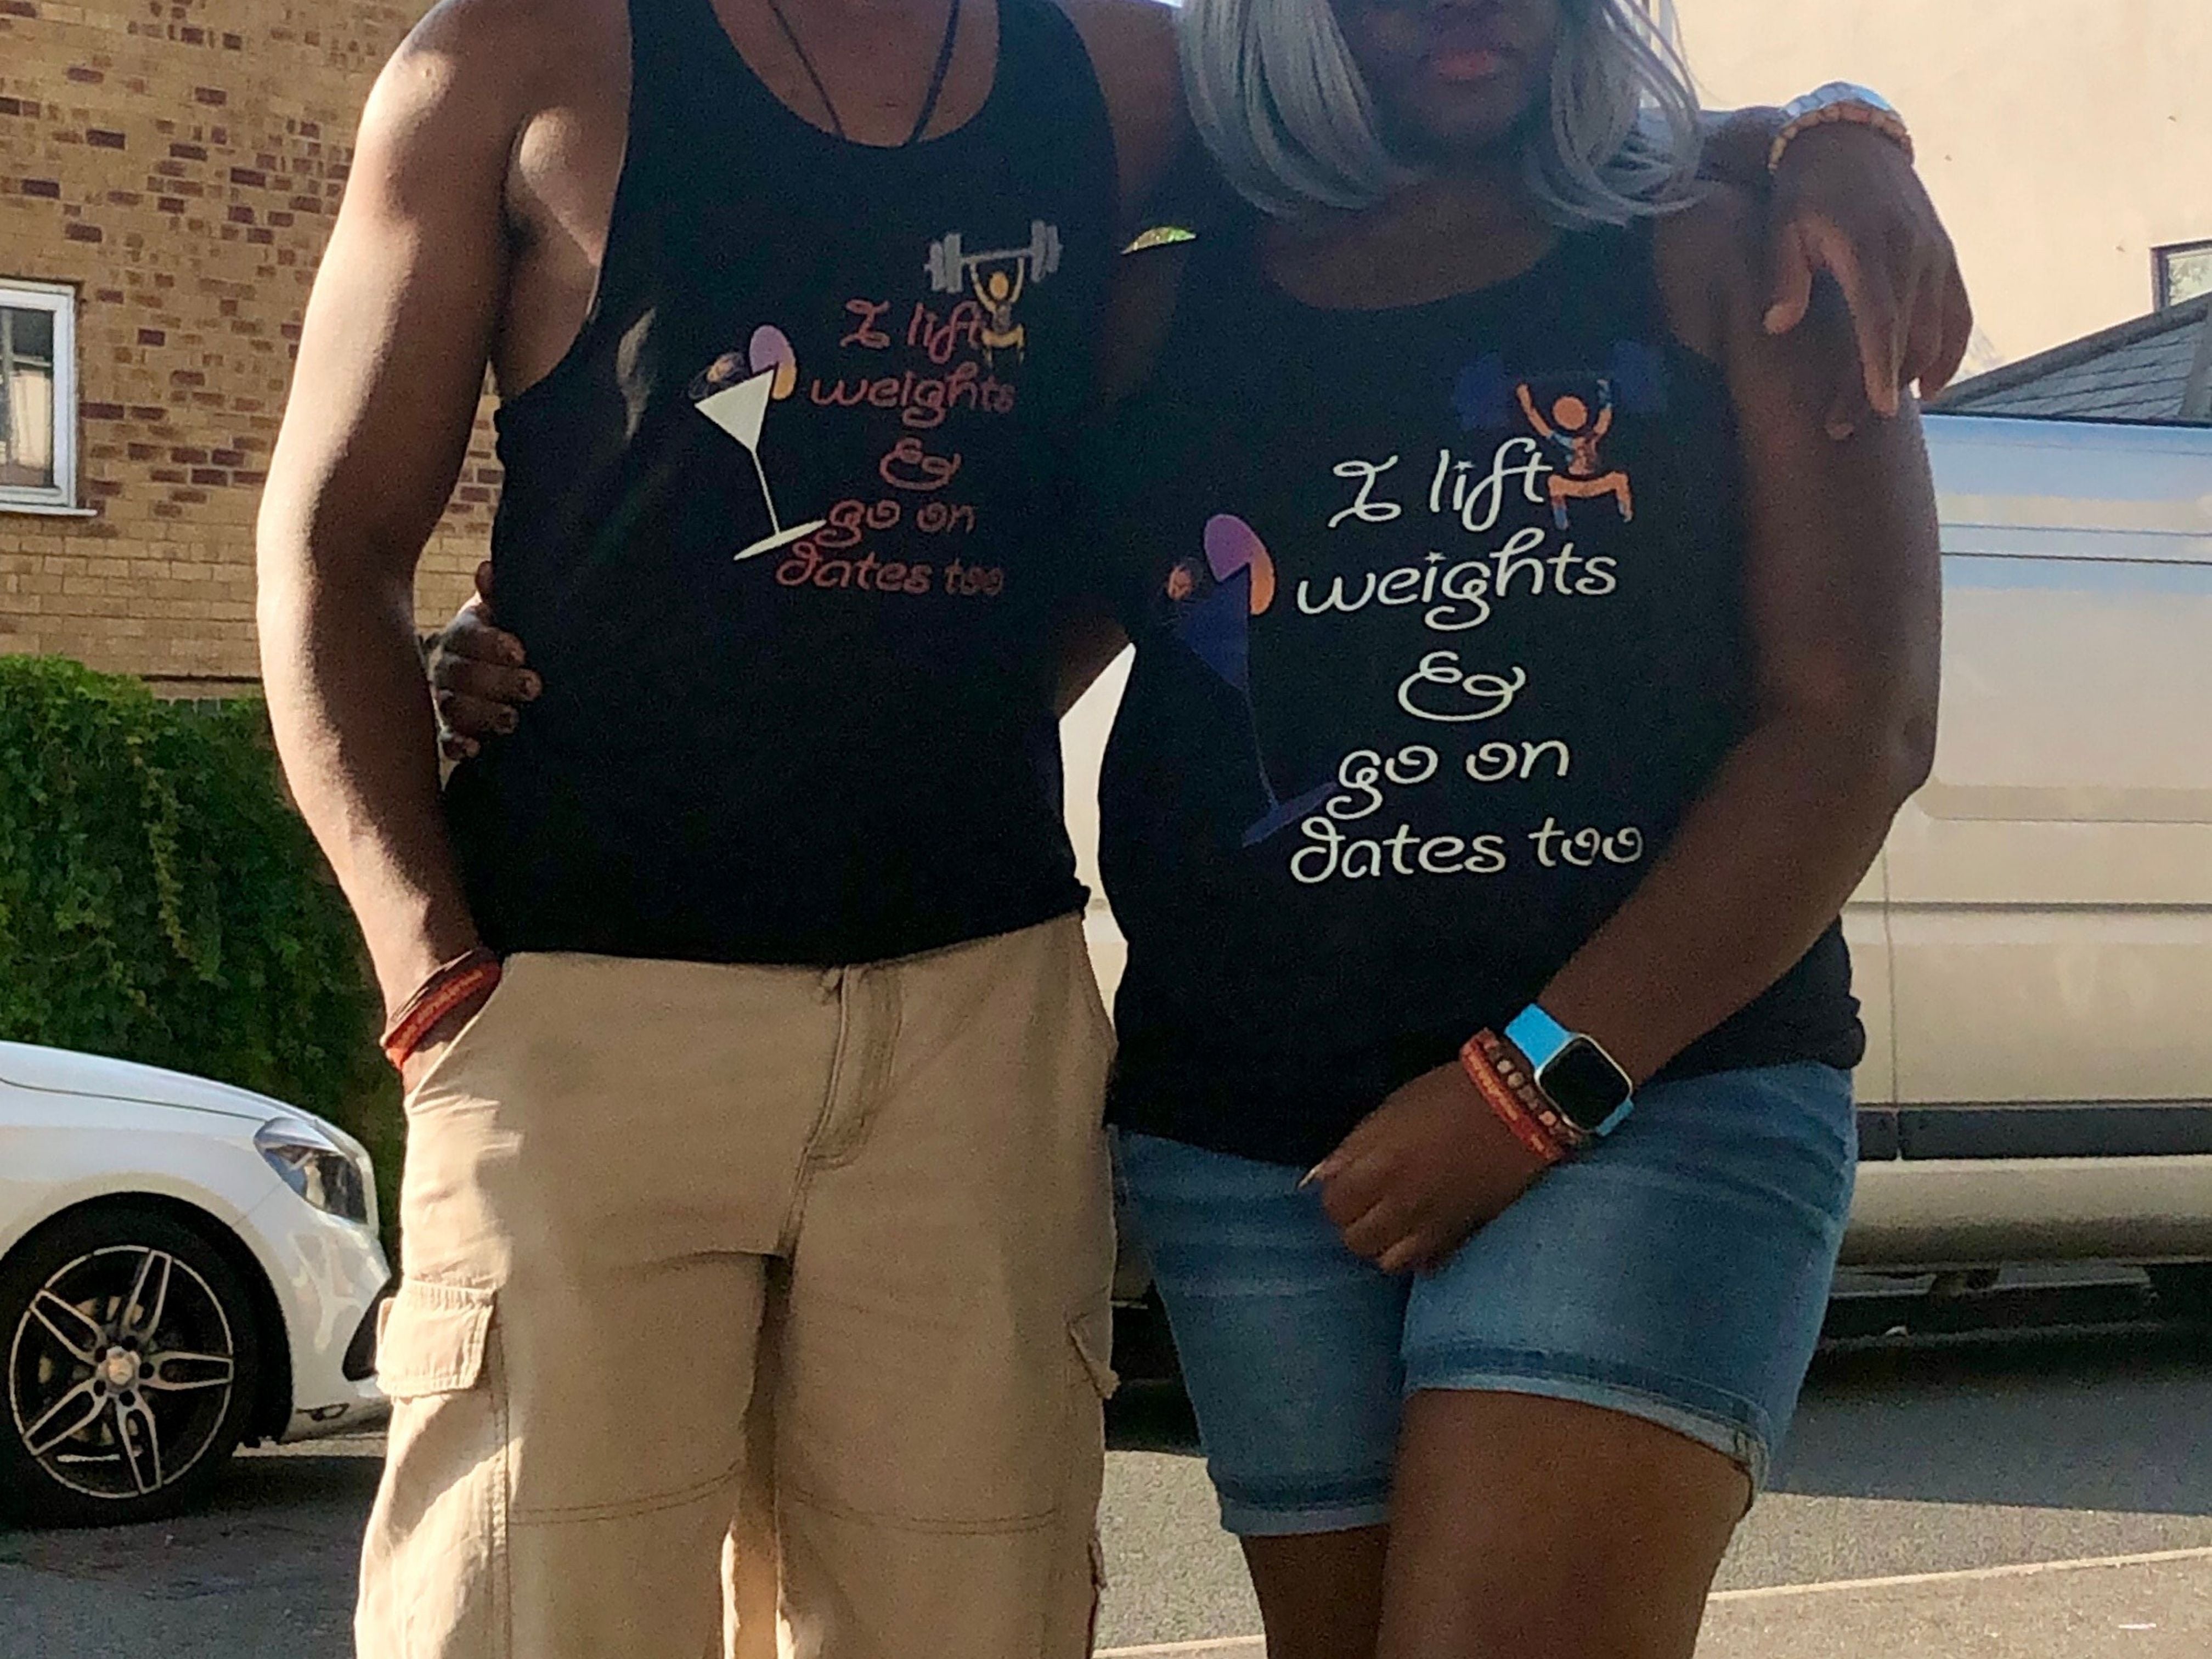 I lift weights and go on dates too flyersetcinc Activewear tank top